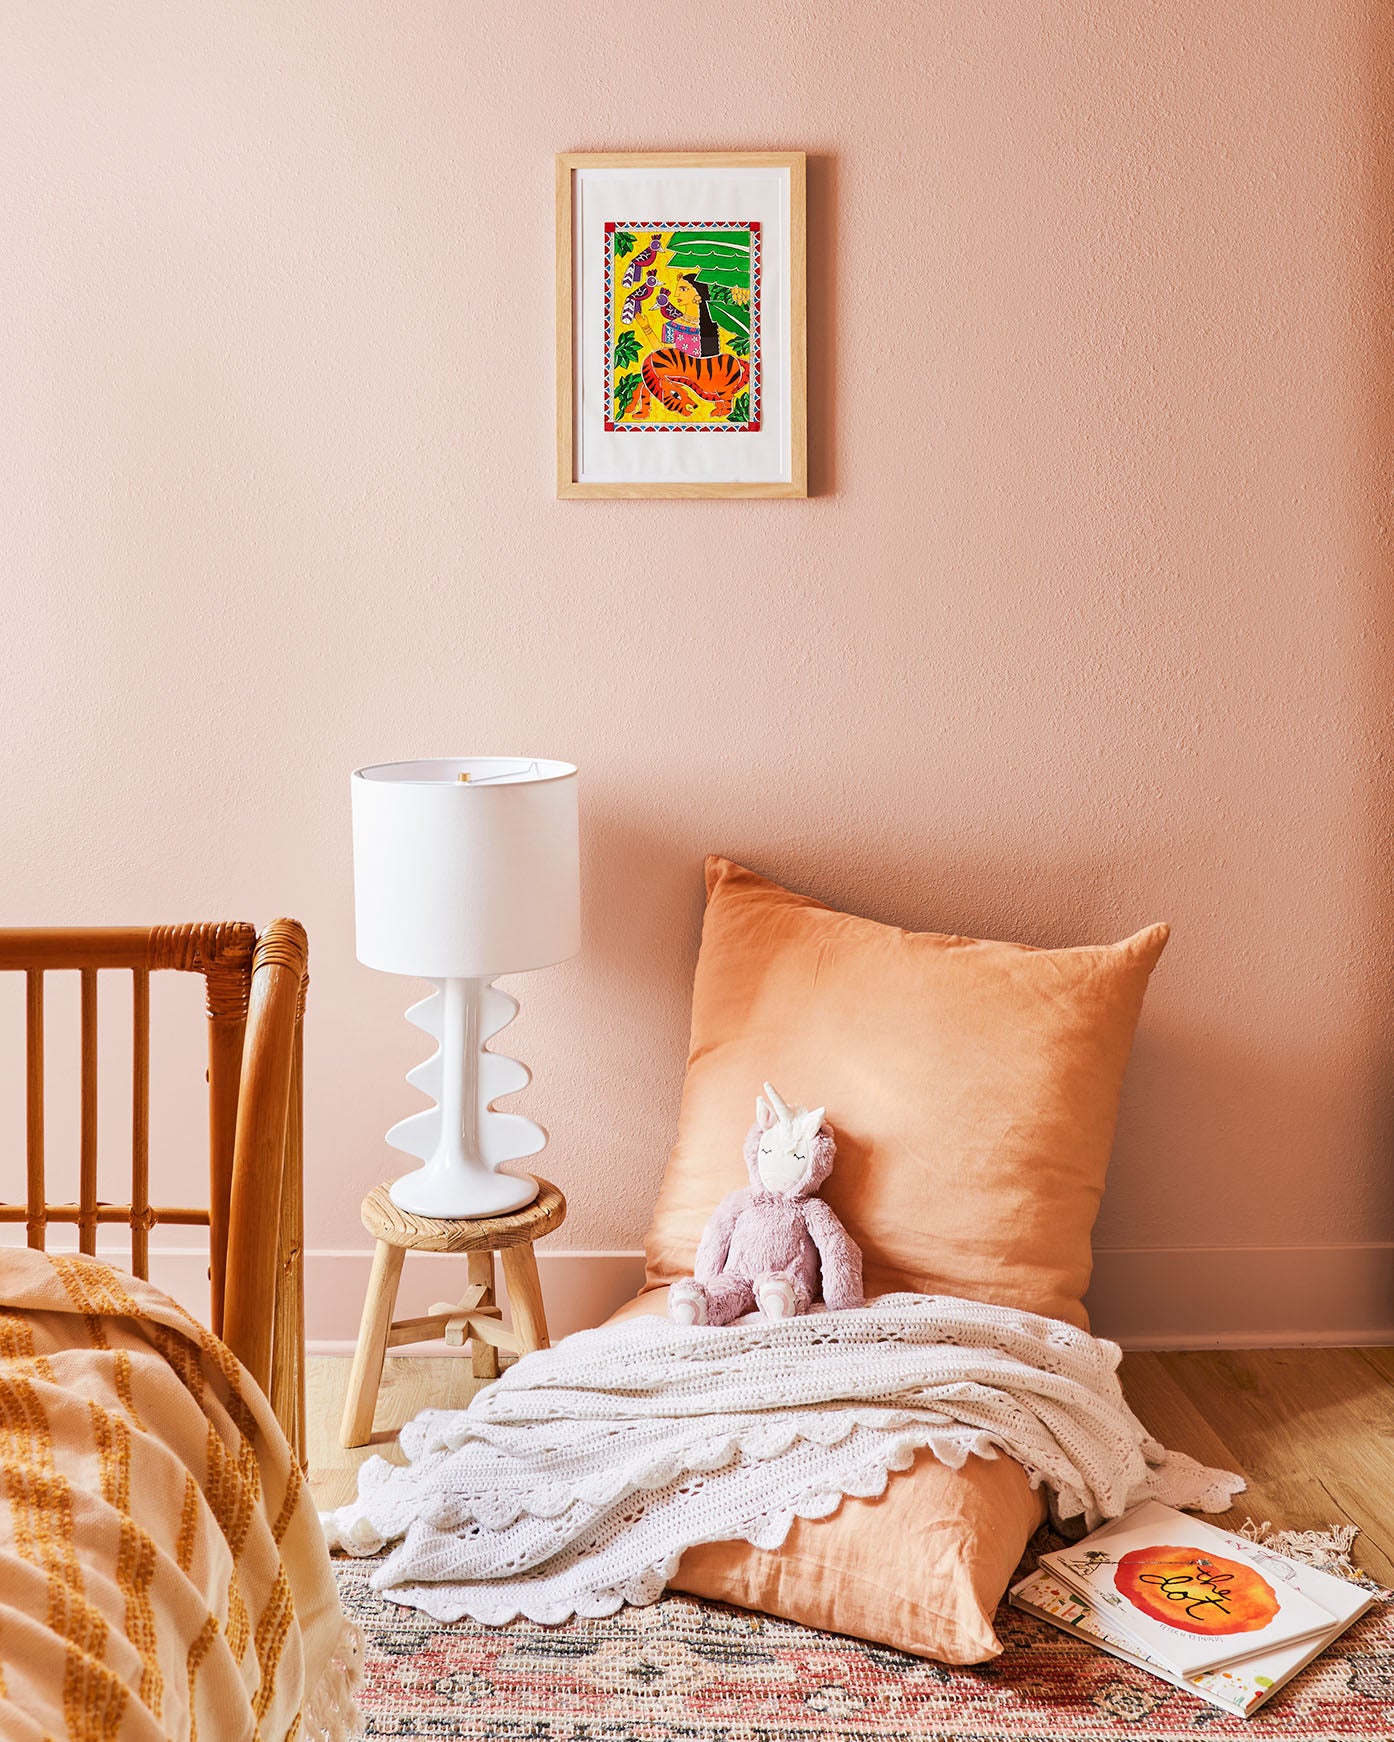 Decorating a little girl's room with fun-meets-functional pieces ensures she'll love growing up in the space.